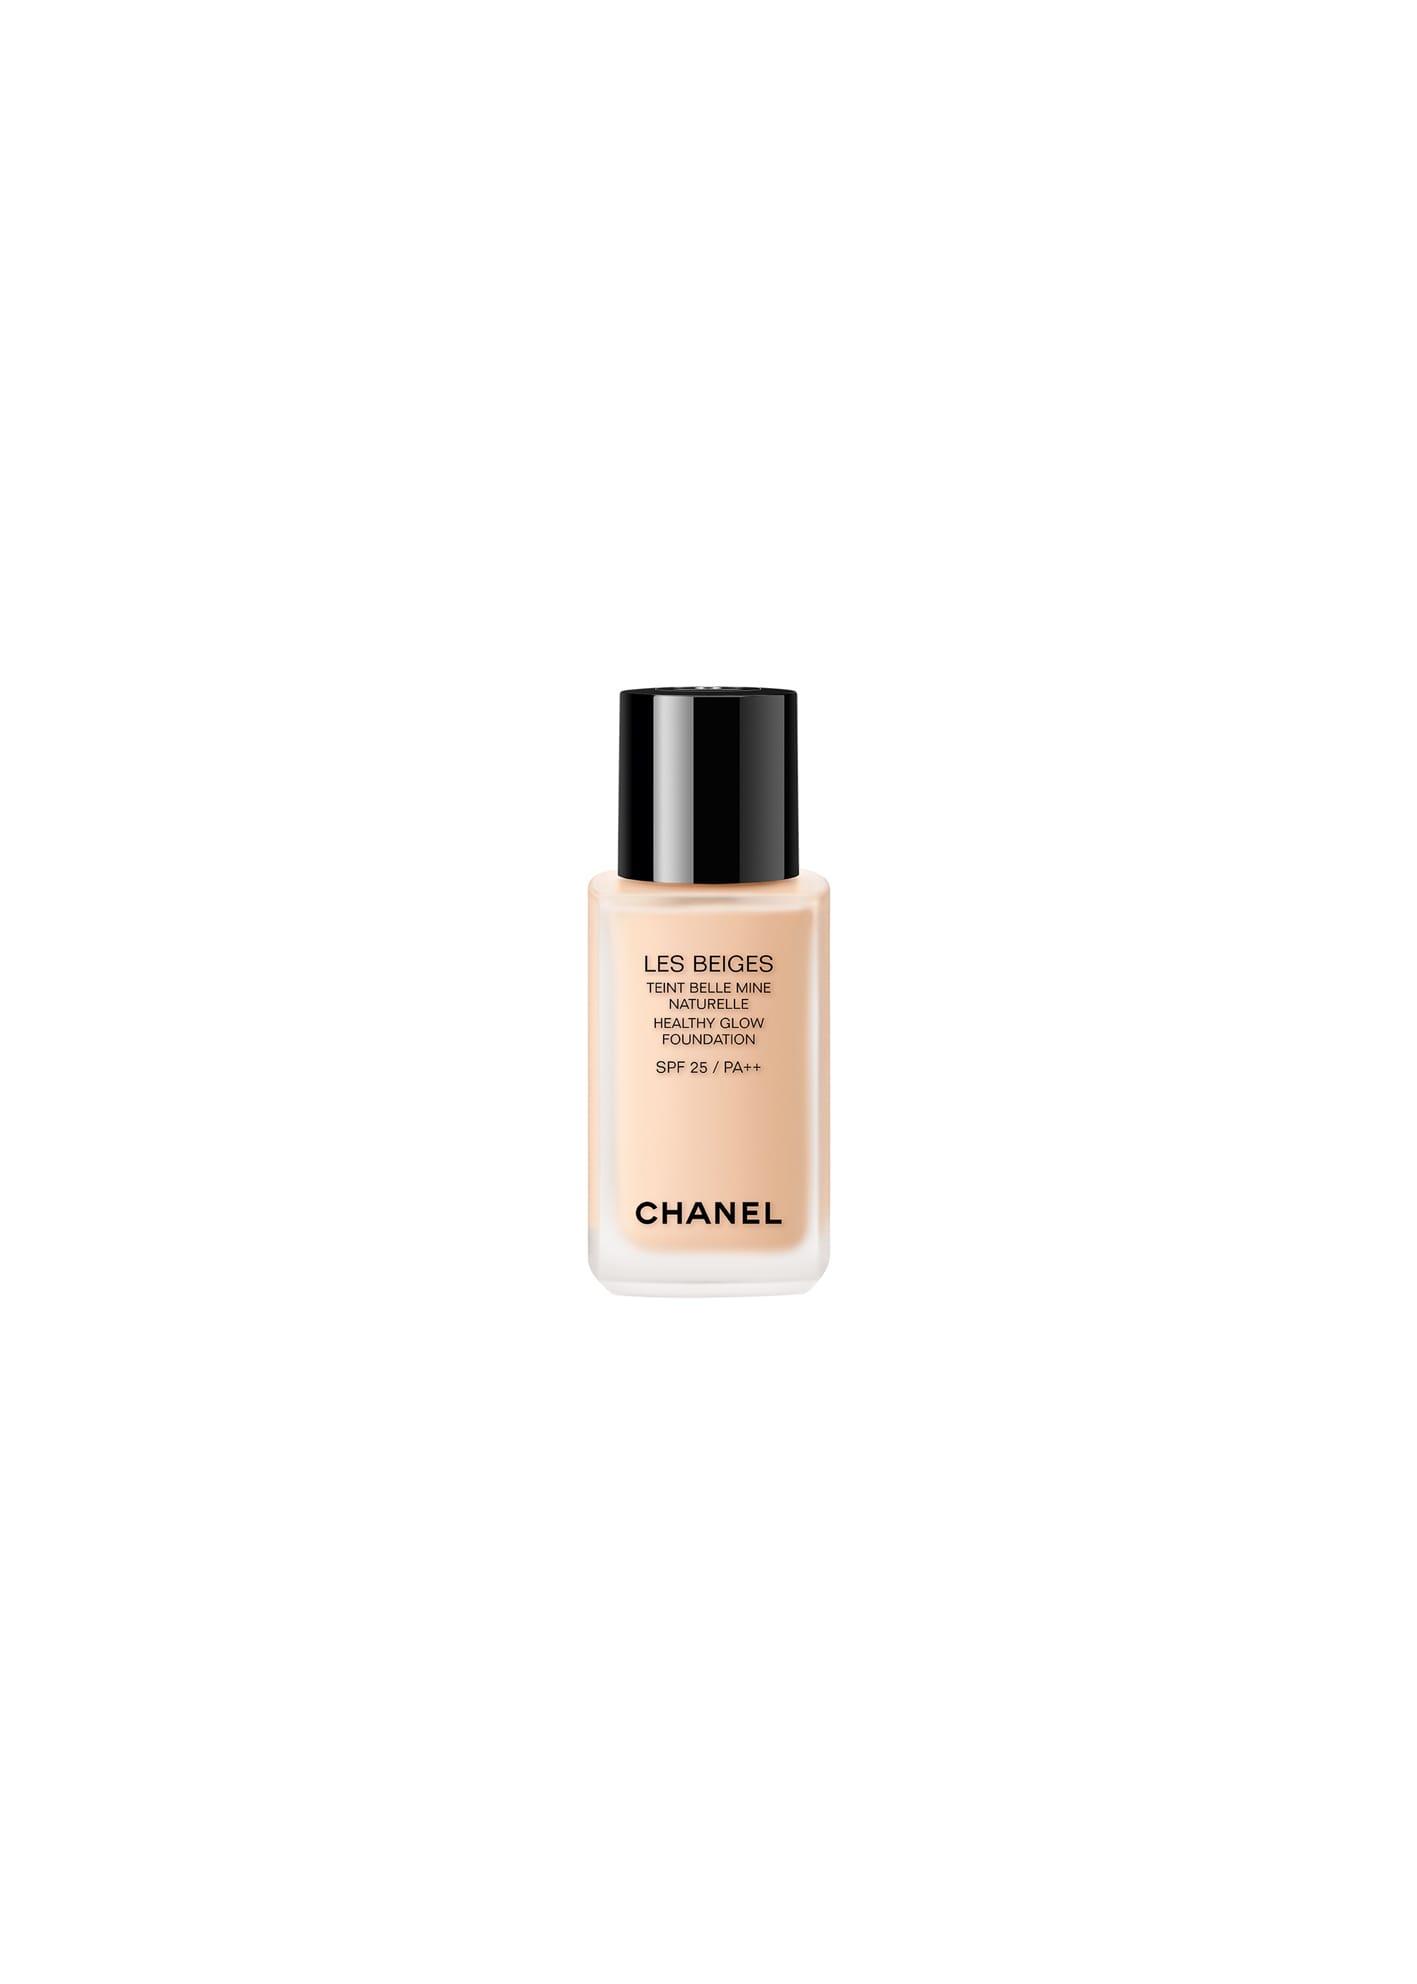 For hydration with a seamless finish, try Chanel's Les Beiges Healthy Glow Foundation, RM200